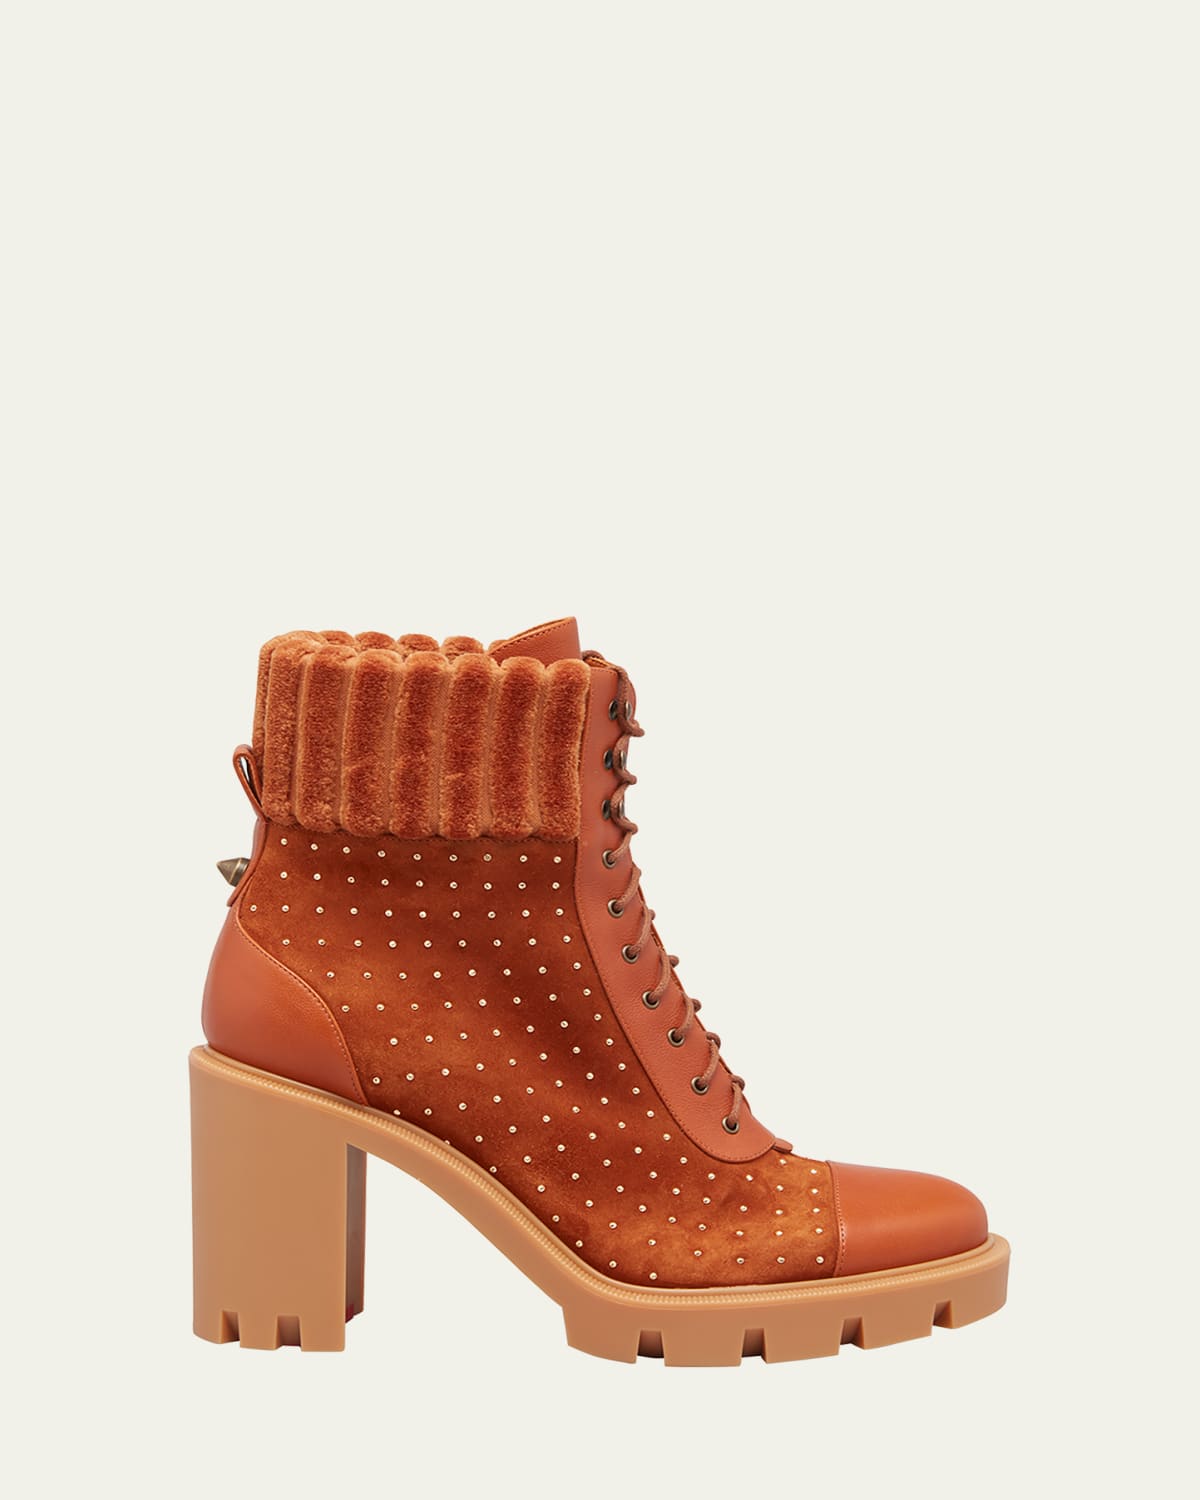 Dakita Studded Suede Red Sole Booties